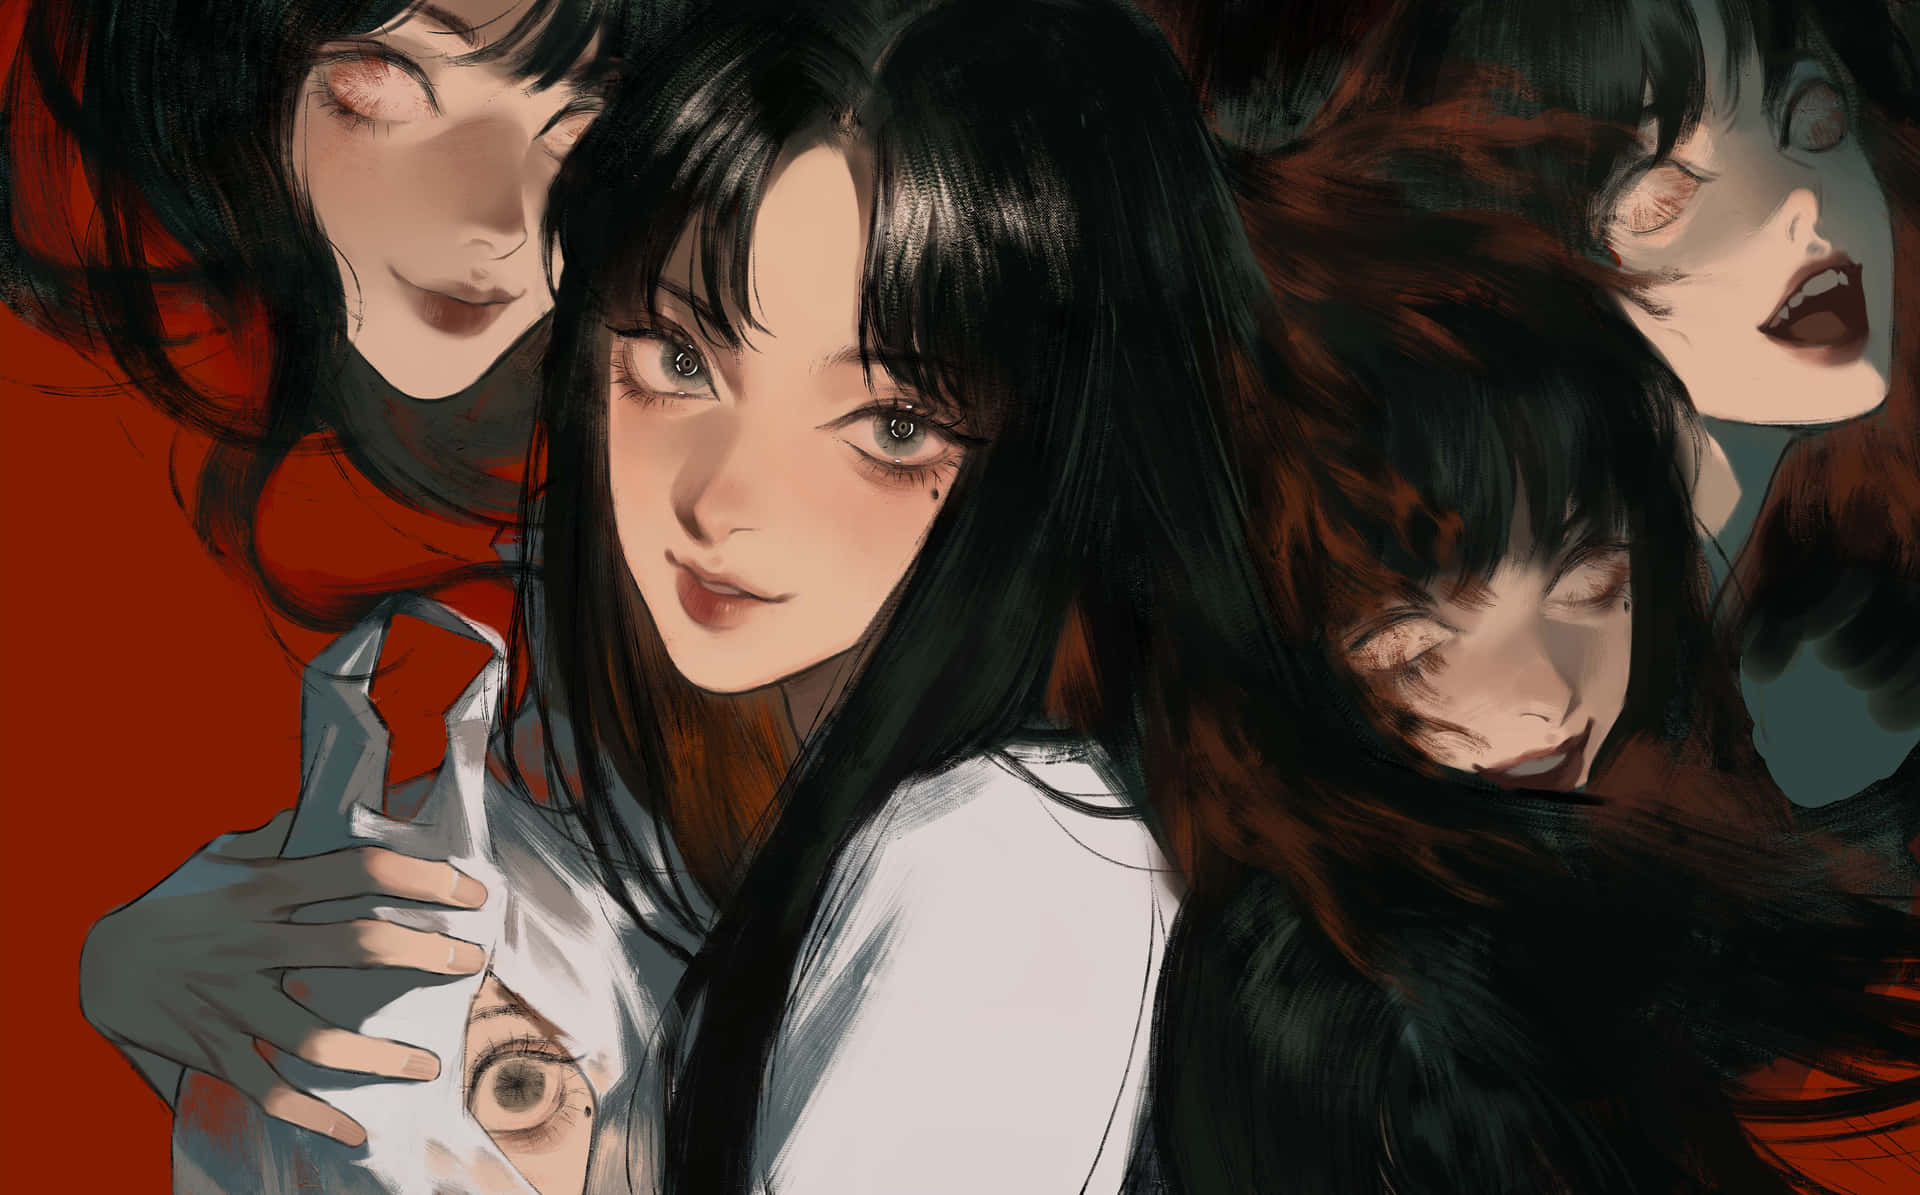 Tomie And Other Girls Wallpaper